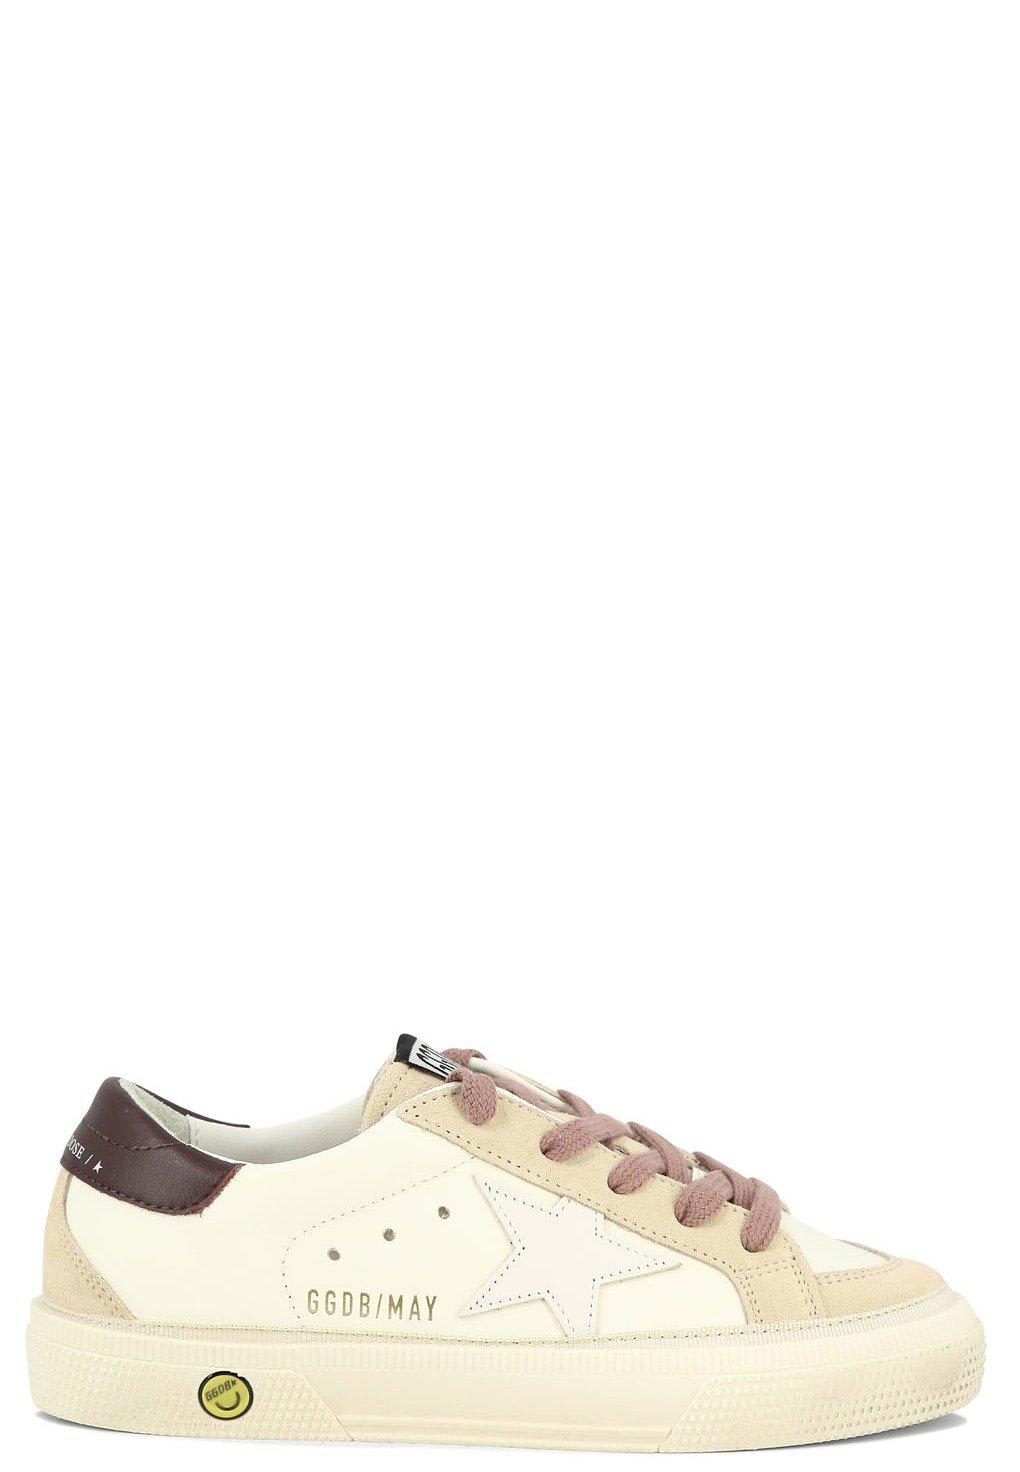 GOLDEN GOOSE MAY LACE-UP SNEAKERS